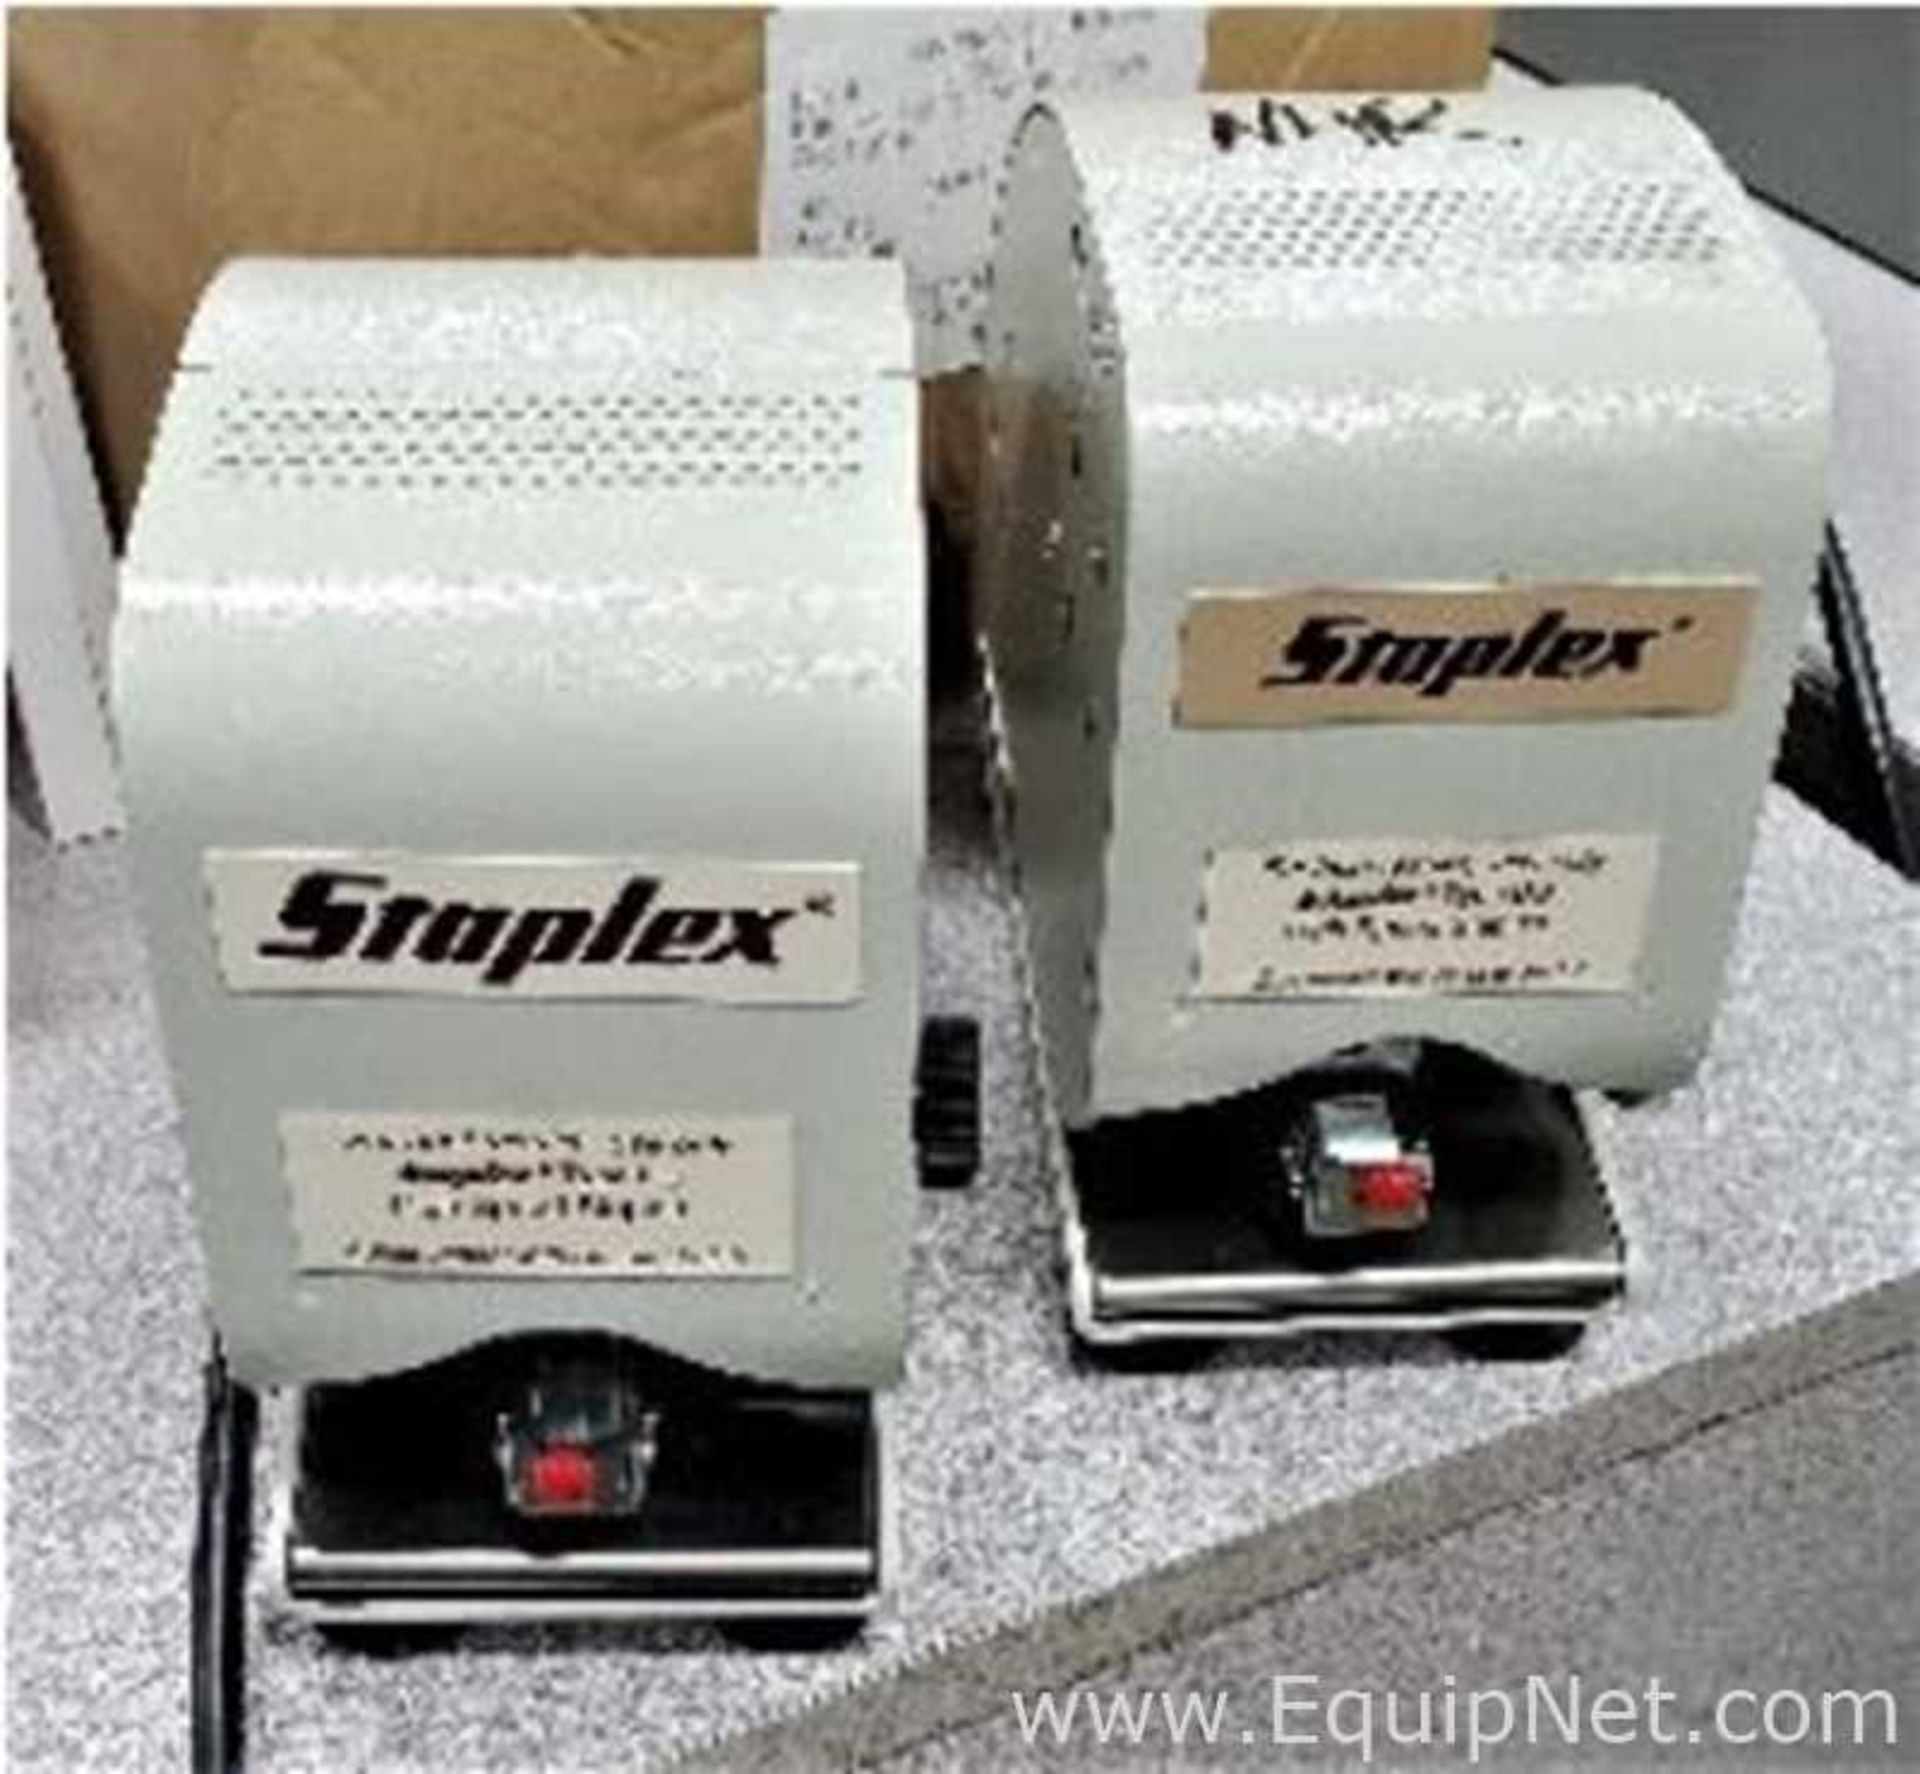 Lot of 2 Staplex Industrial Electric Staplers with Stapling